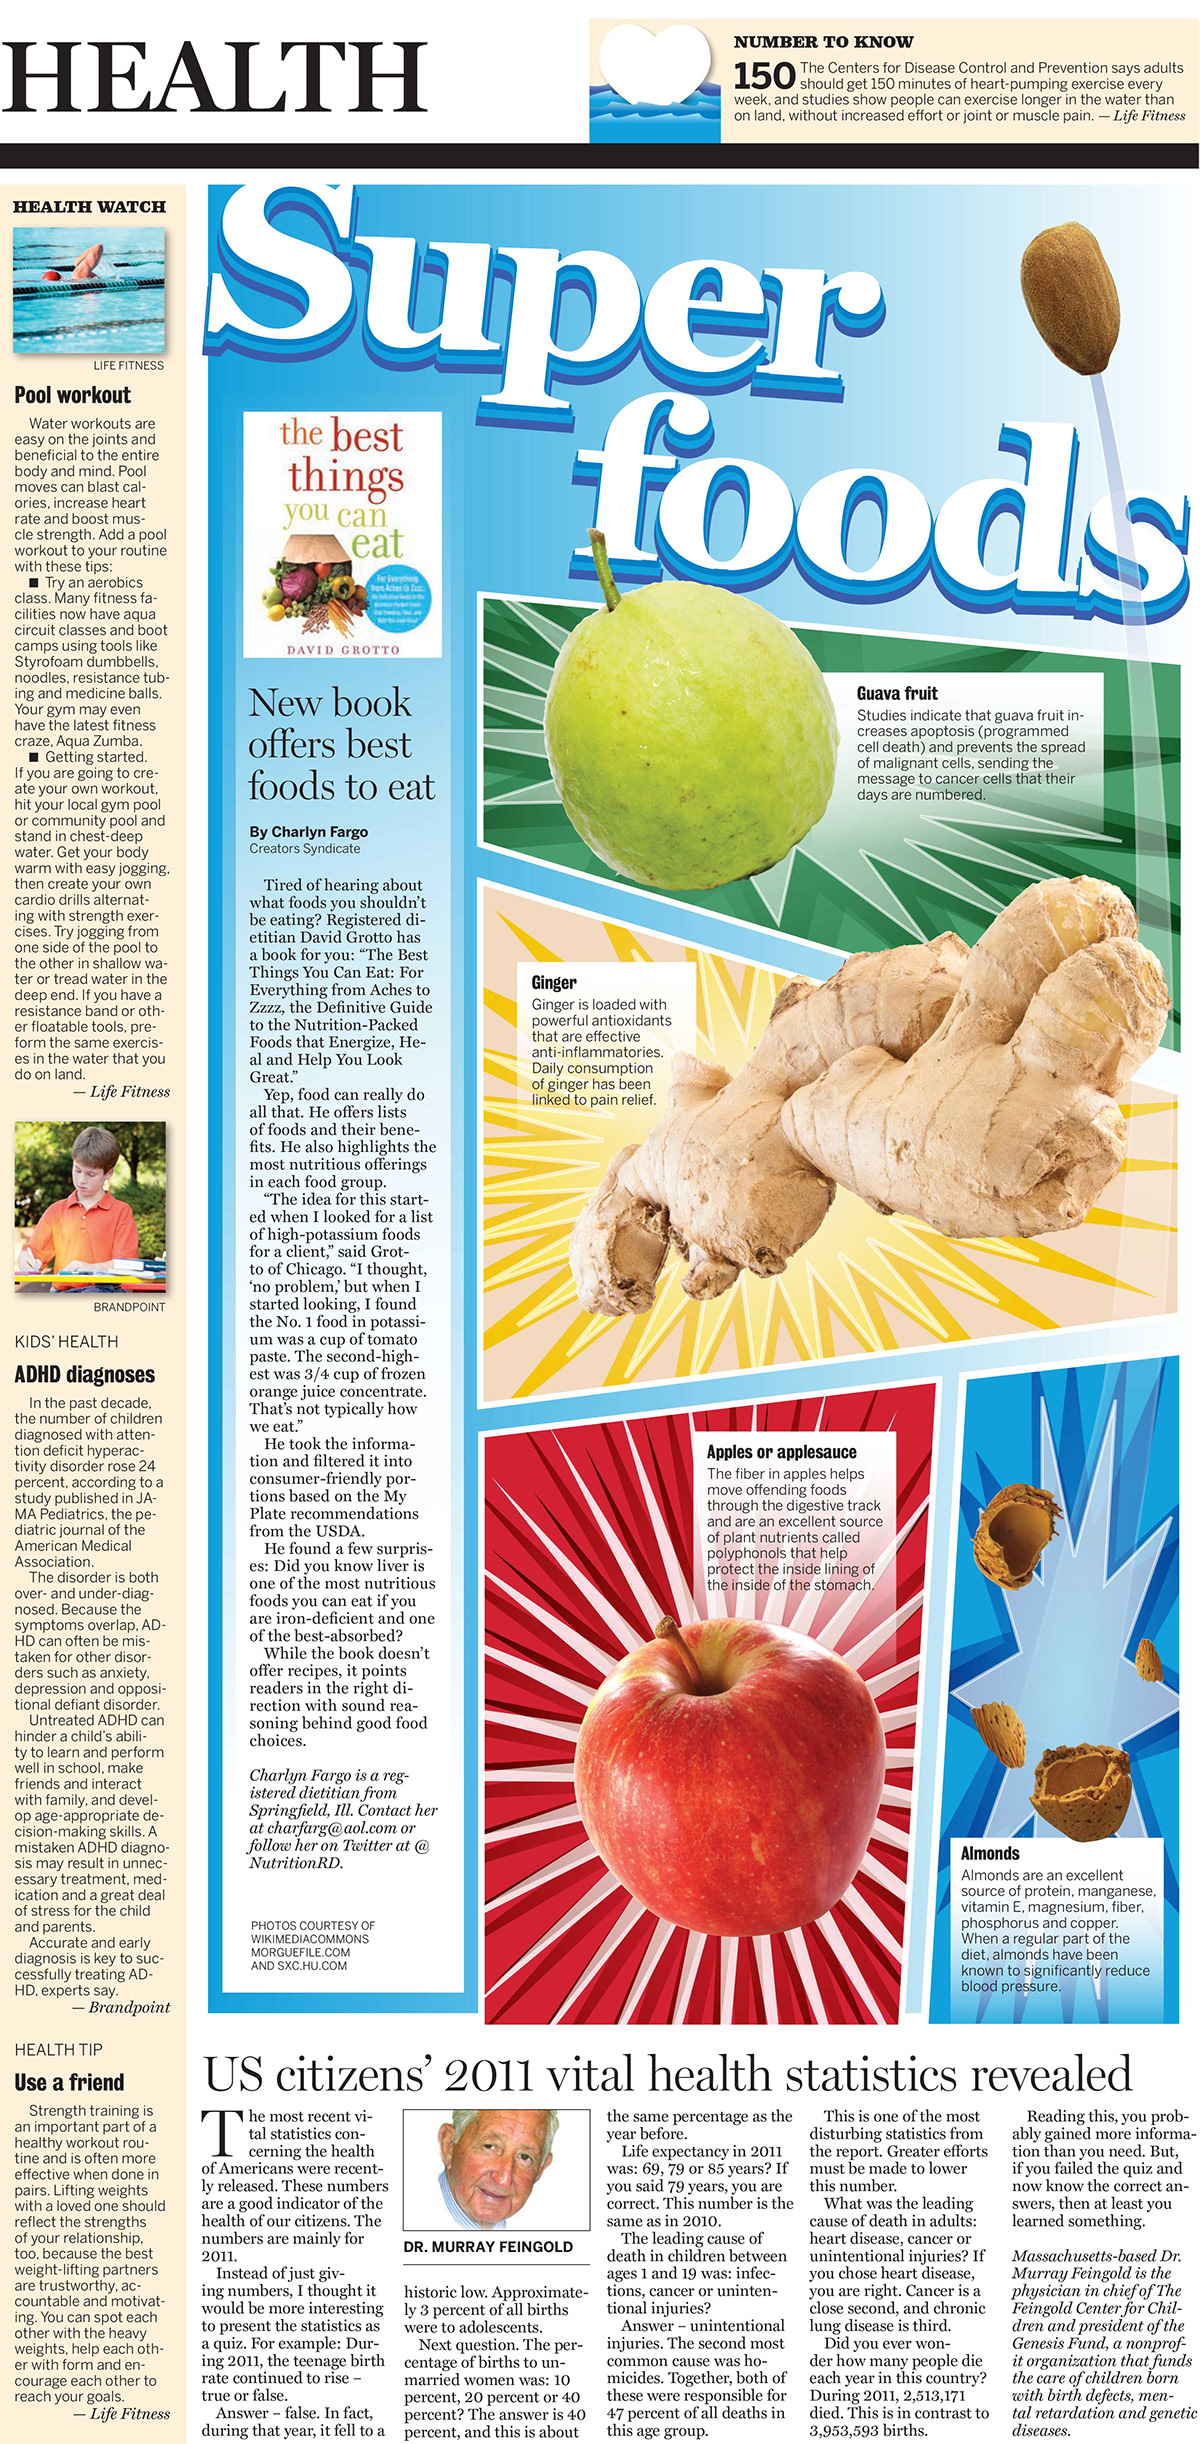 Health feature pages newspapers InDesign CS5